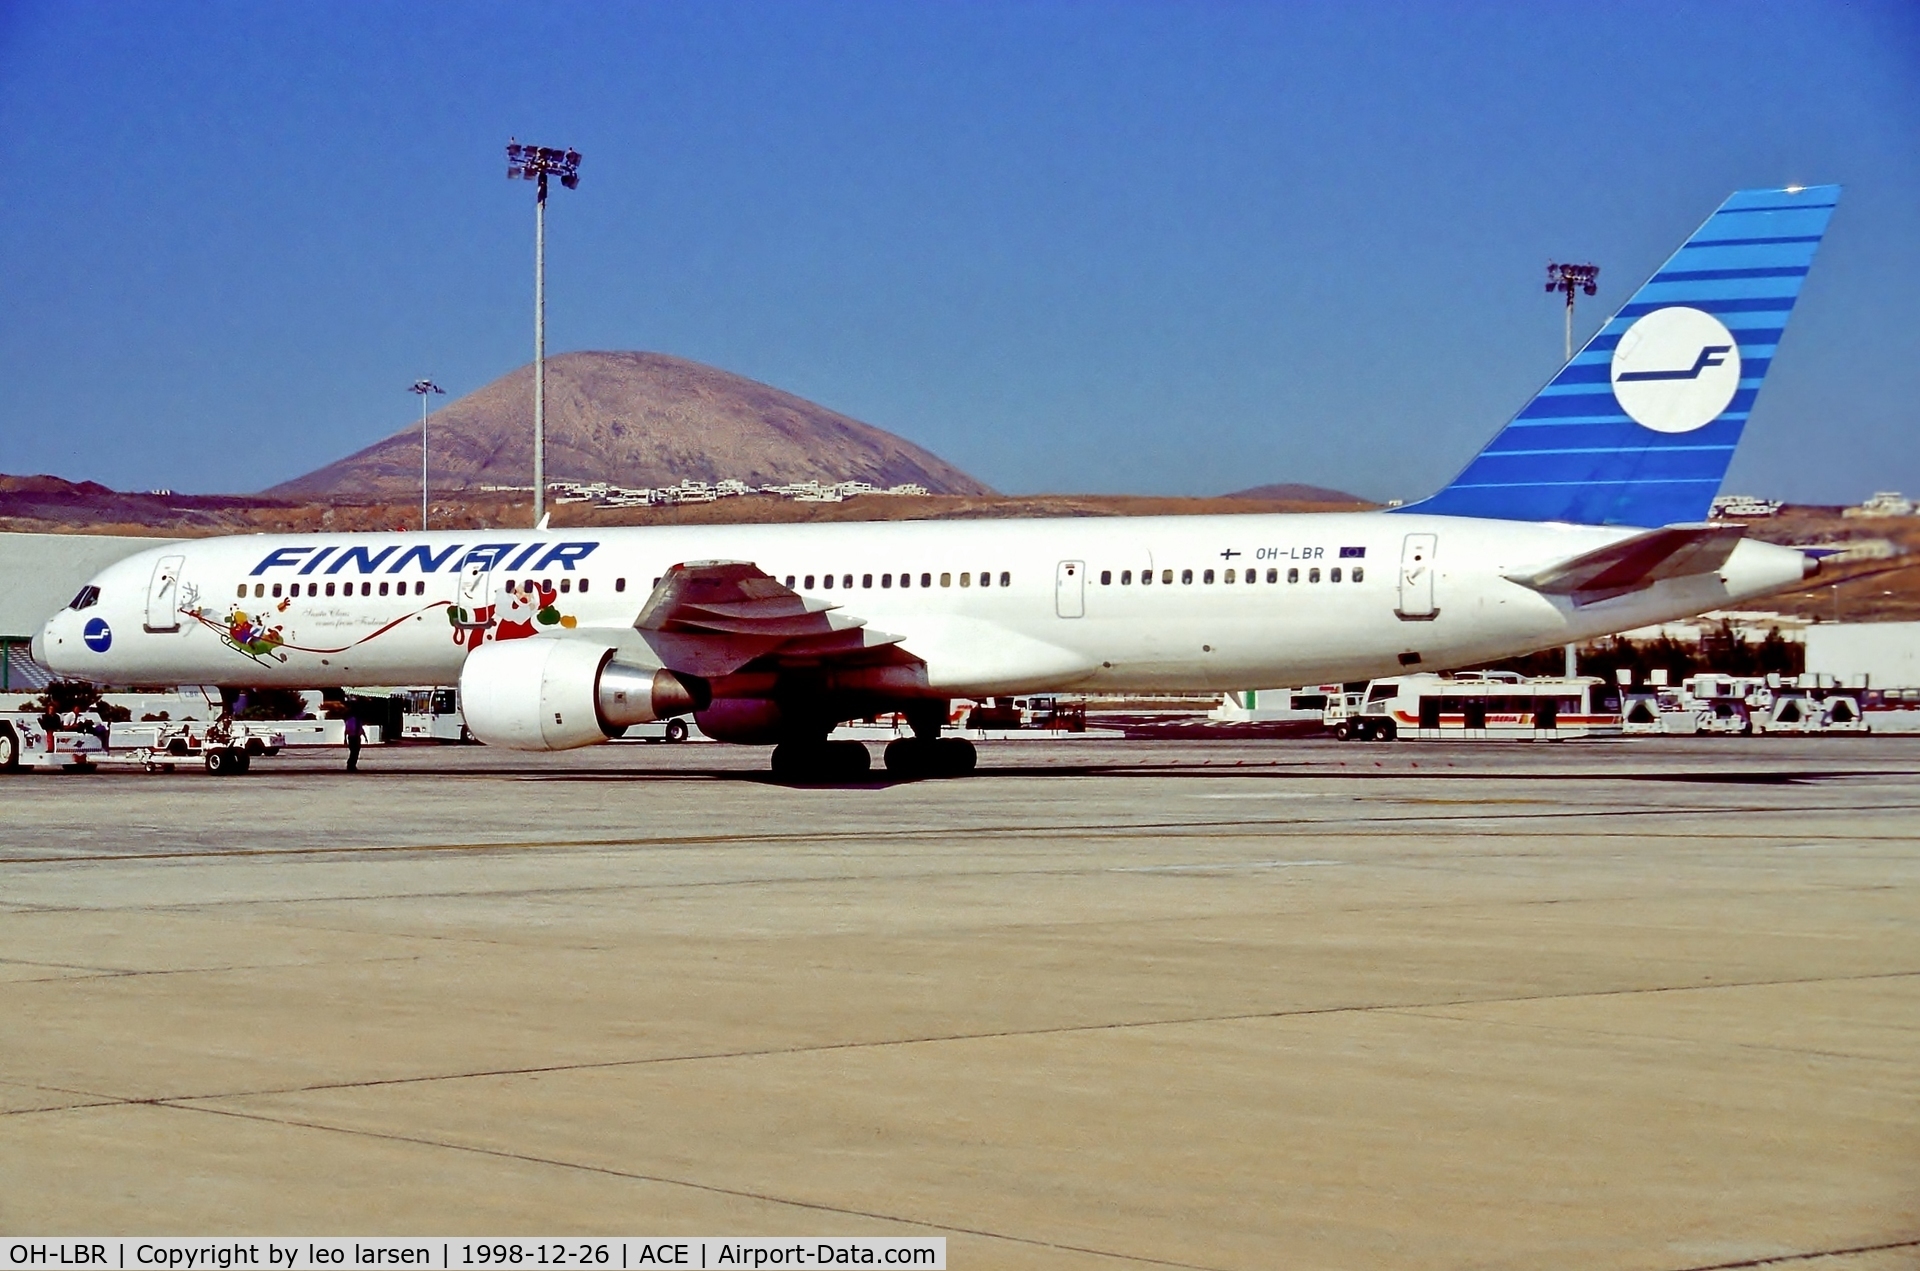 OH-LBR, 1997 Boeing 757-2Q8 C/N 28167, ACE Lanserote 26.12.98